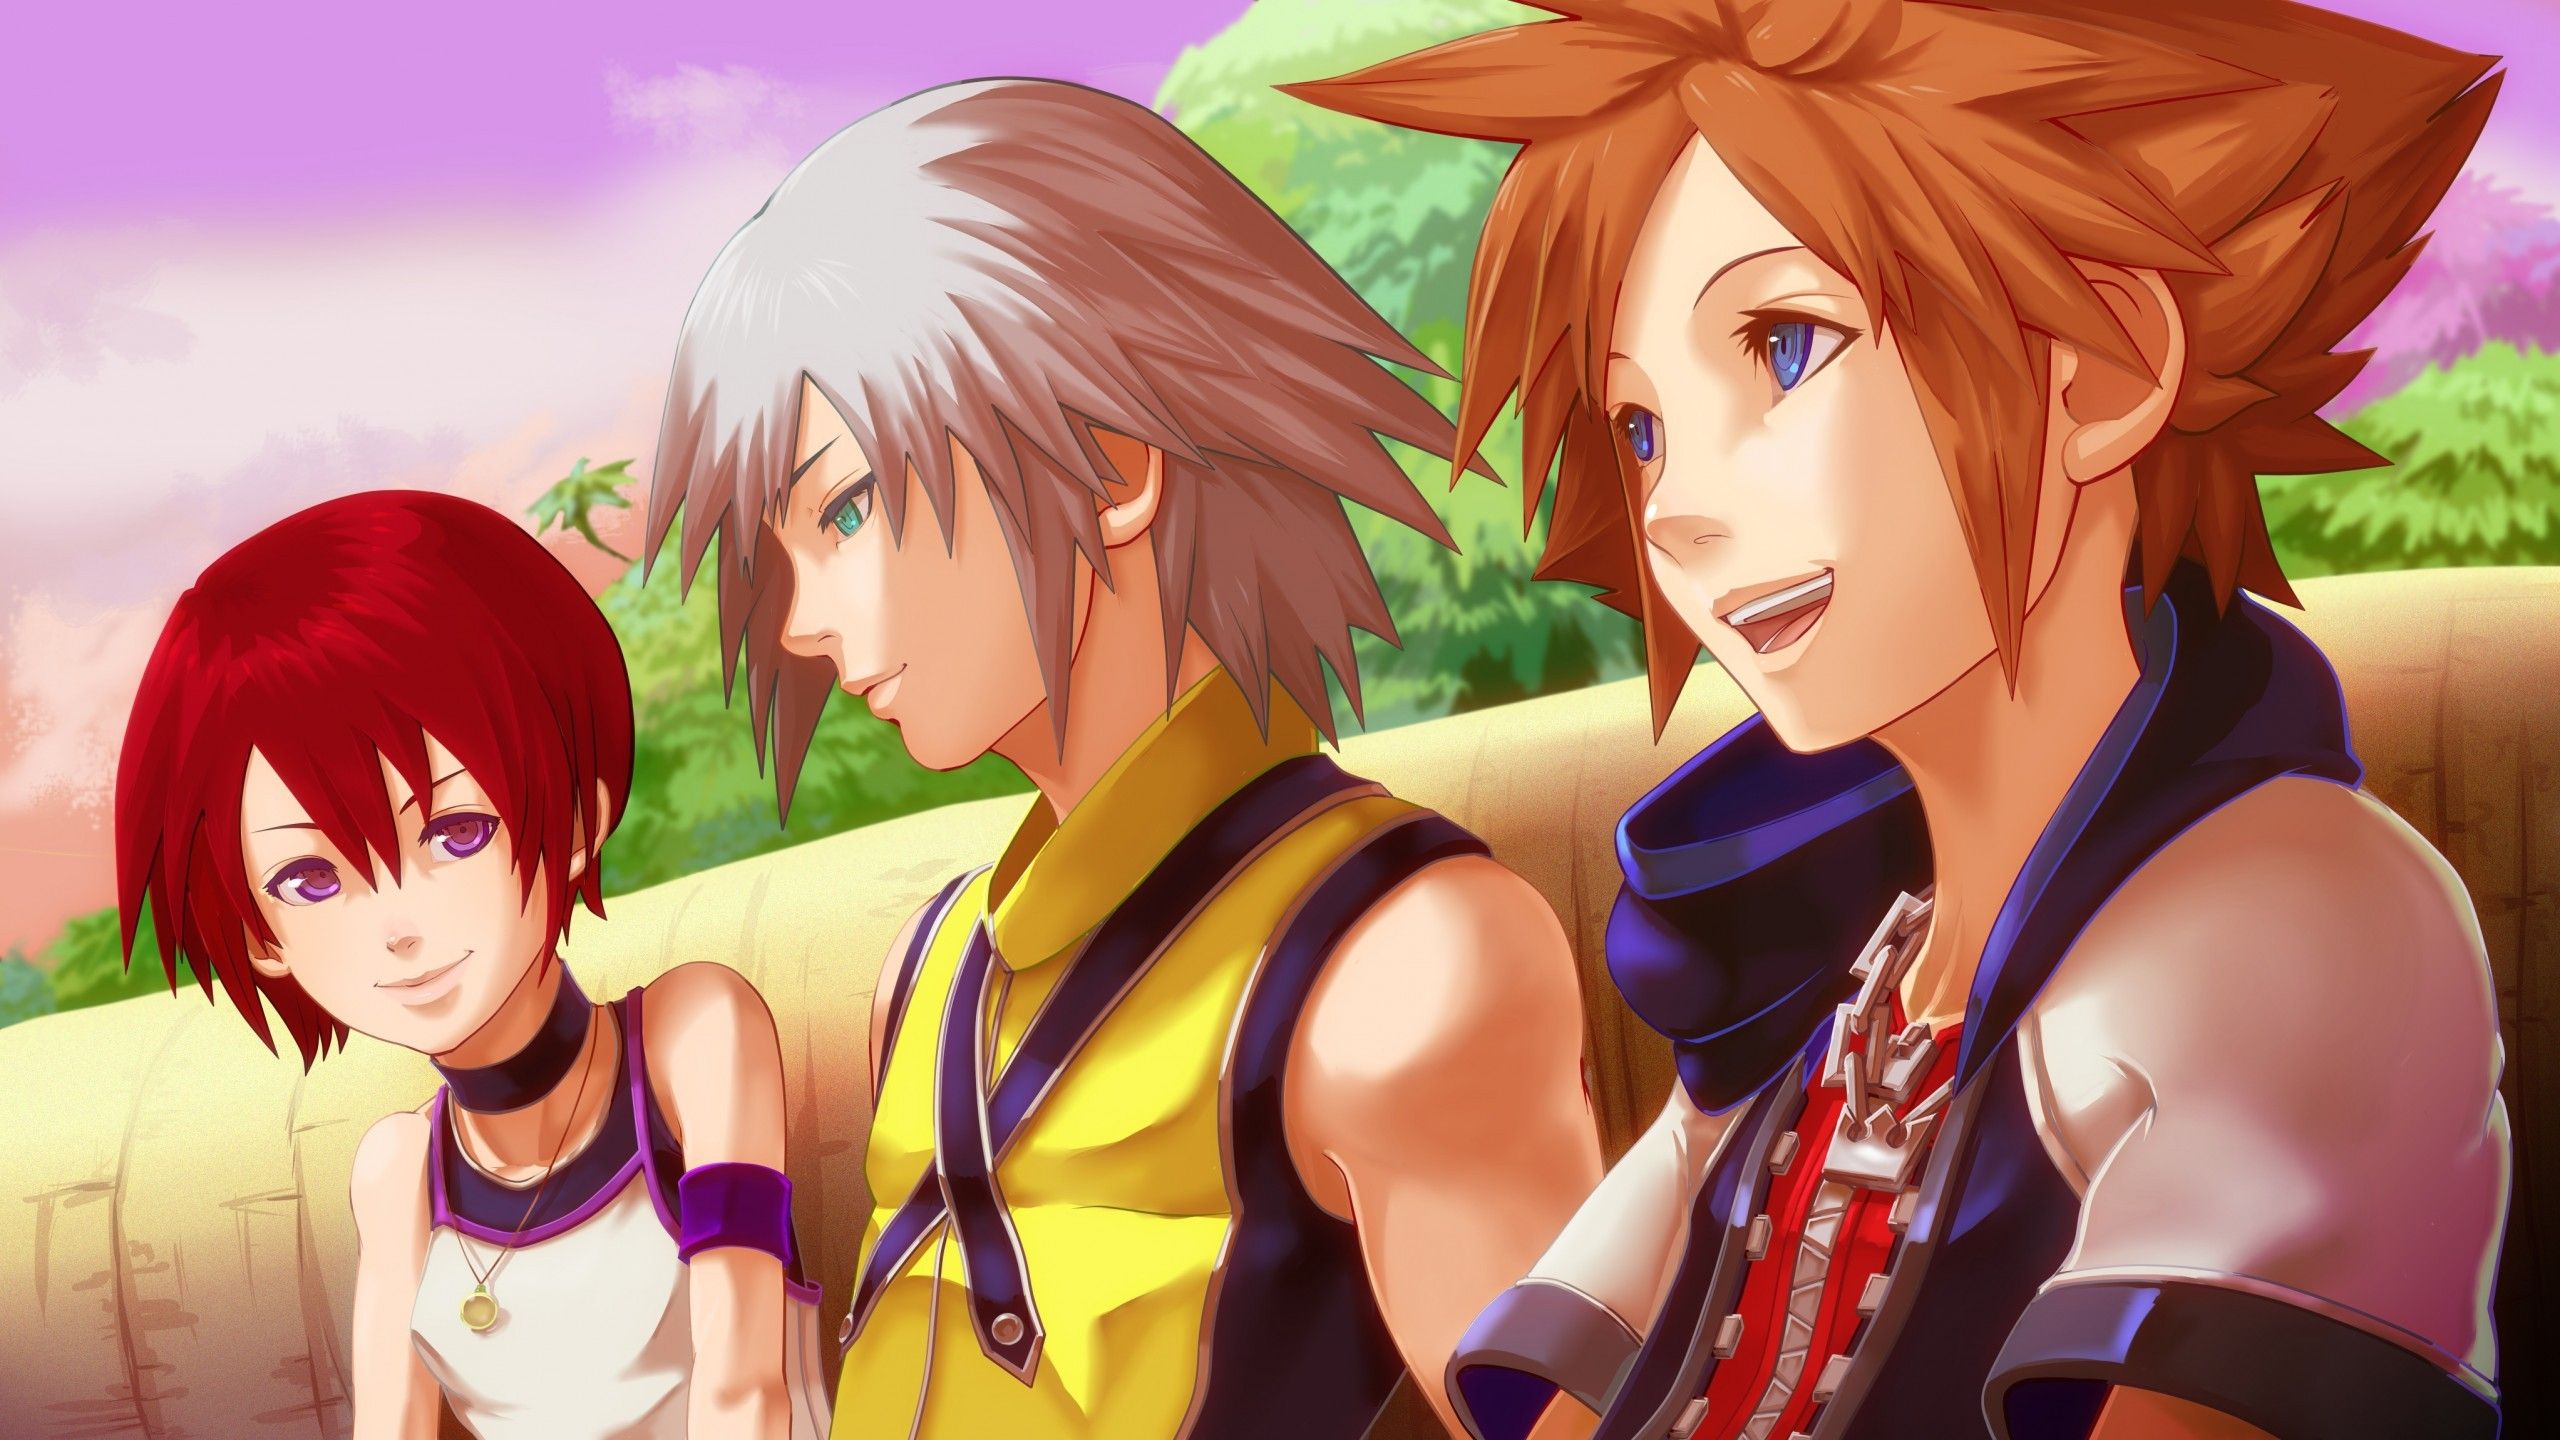 Download 2560x1440 Kingdom Hearts, Characters, Anime Style Games